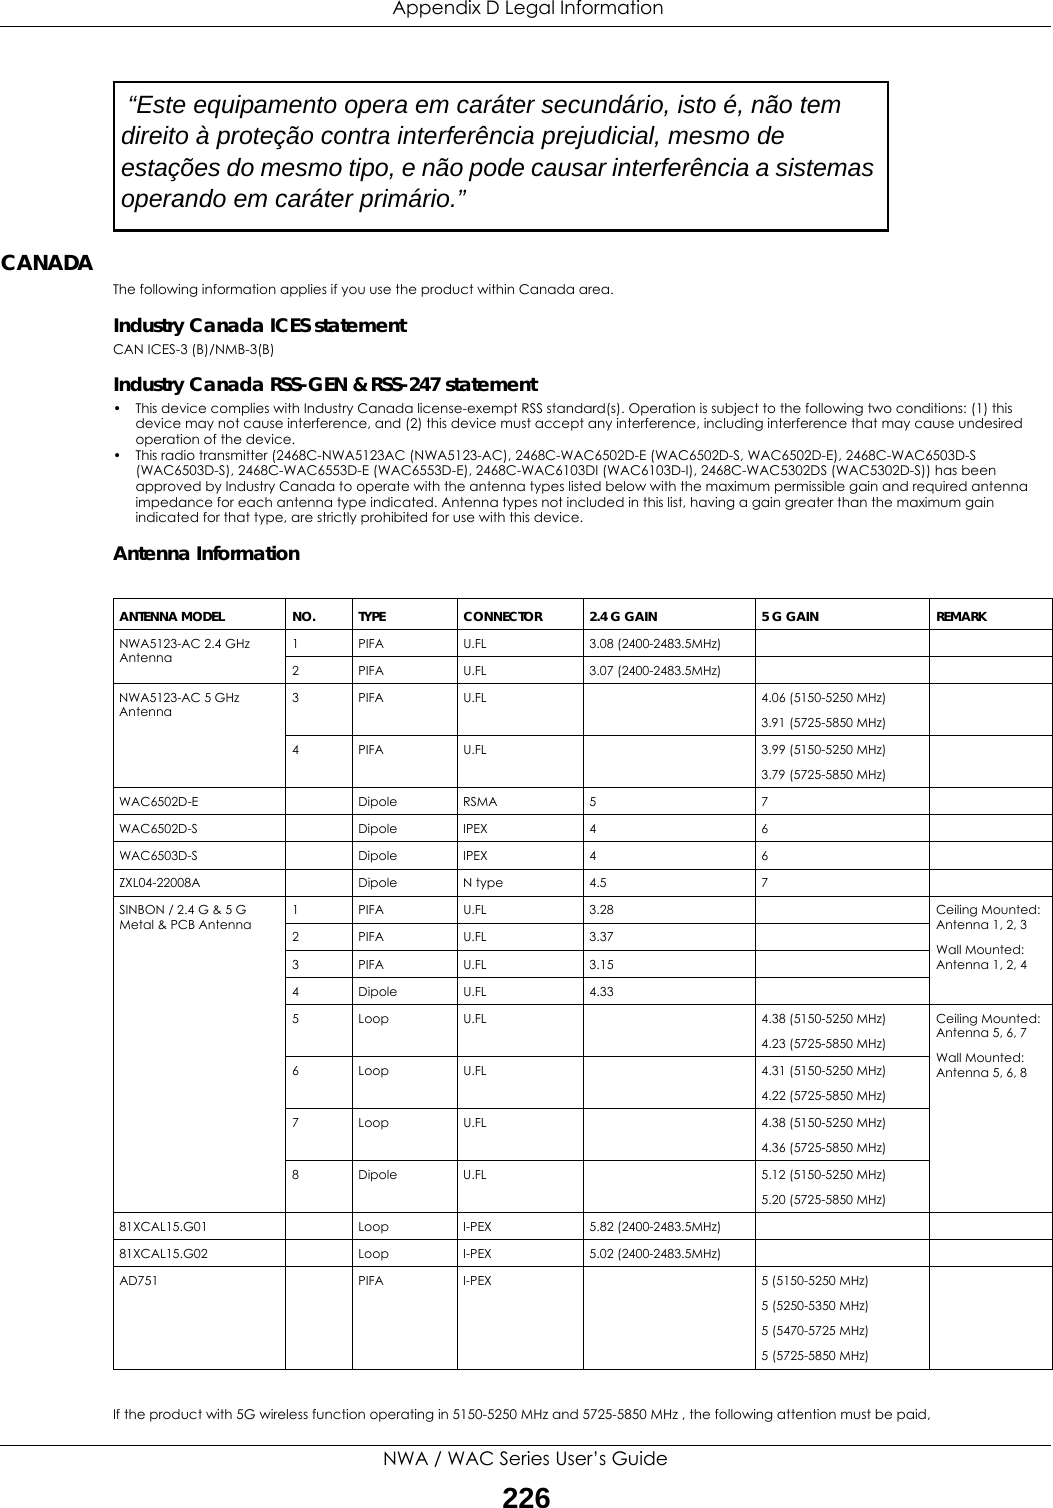  Appendix D Legal InformationNWA / WAC Series User’s Guide226CANADAThe following information applies if you use the product within Canada area.Industry Canada ICES statementCAN ICES-3 (B)/NMB-3(B)Industry Canada RSS-GEN &amp; RSS-247 statement• This device complies with Industry Canada license-exempt RSS standard(s). Operation is subject to the following two conditions: (1) this device may not cause interference, and (2) this device must accept any interference, including interference that may cause undesired operation of the device.• This radio transmitter (2468C-NWA5123AC (NWA5123-AC), 2468C-WAC6502D-E (WAC6502D-S, WAC6502D-E), 2468C-WAC6503D-S (WAC6503D-S), 2468C-WAC6553D-E (WAC6553D-E), 2468C-WAC6103DI (WAC6103D-I), 2468C-WAC5302DS (WAC5302D-S)) has been approved by Industry Canada to operate with the antenna types listed below with the maximum permissible gain and required antenna impedance for each antenna type indicated. Antenna types not included in this list, having a gain greater than the maximum gain indicated for that type, are strictly prohibited for use with this device.Antenna Information If the product with 5G wireless function operating in 5150-5250 MHz and 5725-5850 MHz , the following attention must be paid,  “Este equipamento opera em caráter secundário, isto é, não tem direito à proteção contra interferência prejudicial, mesmo de estações do mesmo tipo, e não pode causar interferência a sistemas operando em caráter primário.” ANTENNA MODEL NO. TYPE CONNECTOR 2.4 G GAIN 5 G GAIN REMARKNWA5123-AC 2.4 GHz Antenna1 PIFA U.FL 3.08 (2400-2483.5MHz)2 PIFA U.FL 3.07 (2400-2483.5MHz)NWA5123-AC 5 GHz Antenna3 PIFA U.FL 4.06 (5150-5250 MHz)3.91 (5725-5850 MHz)4 PIFA U.FL 3.99 (5150-5250 MHz)3.79 (5725-5850 MHz)WAC6502D-E Dipole RSMA 5 7WAC6502D-S Dipole IPEX 4 6WAC6503D-S Dipole IPEX 4 6ZXL04-22008A Dipole N type 4.5 7SINBON / 2.4 G &amp; 5 G Metal &amp; PCB Antenna1 PIFA U.FL 3.28 Ceiling Mounted: Antenna 1, 2, 3Wall Mounted: Antenna 1, 2, 42PIFA U.FL 3.373PIFA U.FL 3.154Dipole U.FL 4.335 Loop U.FL 4.38 (5150-5250 MHz)4.23 (5725-5850 MHz)Ceiling Mounted: Antenna 5, 6, 7Wall Mounted: Antenna 5, 6, 86 Loop U.FL 4.31 (5150-5250 MHz)4.22 (5725-5850 MHz)7 Loop U.FL 4.38 (5150-5250 MHz)4.36 (5725-5850 MHz)8 Dipole U.FL 5.12 (5150-5250 MHz)5.20 (5725-5850 MHz)81XCAL15.G01 Loop I-PEX 5.82 (2400-2483.5MHz)81XCAL15.G02 Loop I-PEX 5.02 (2400-2483.5MHz)AD751 PIFA I-PEX 5 (5150-5250 MHz)5 (5250-5350 MHz)5 (5470-5725 MHz)5 (5725-5850 MHz)